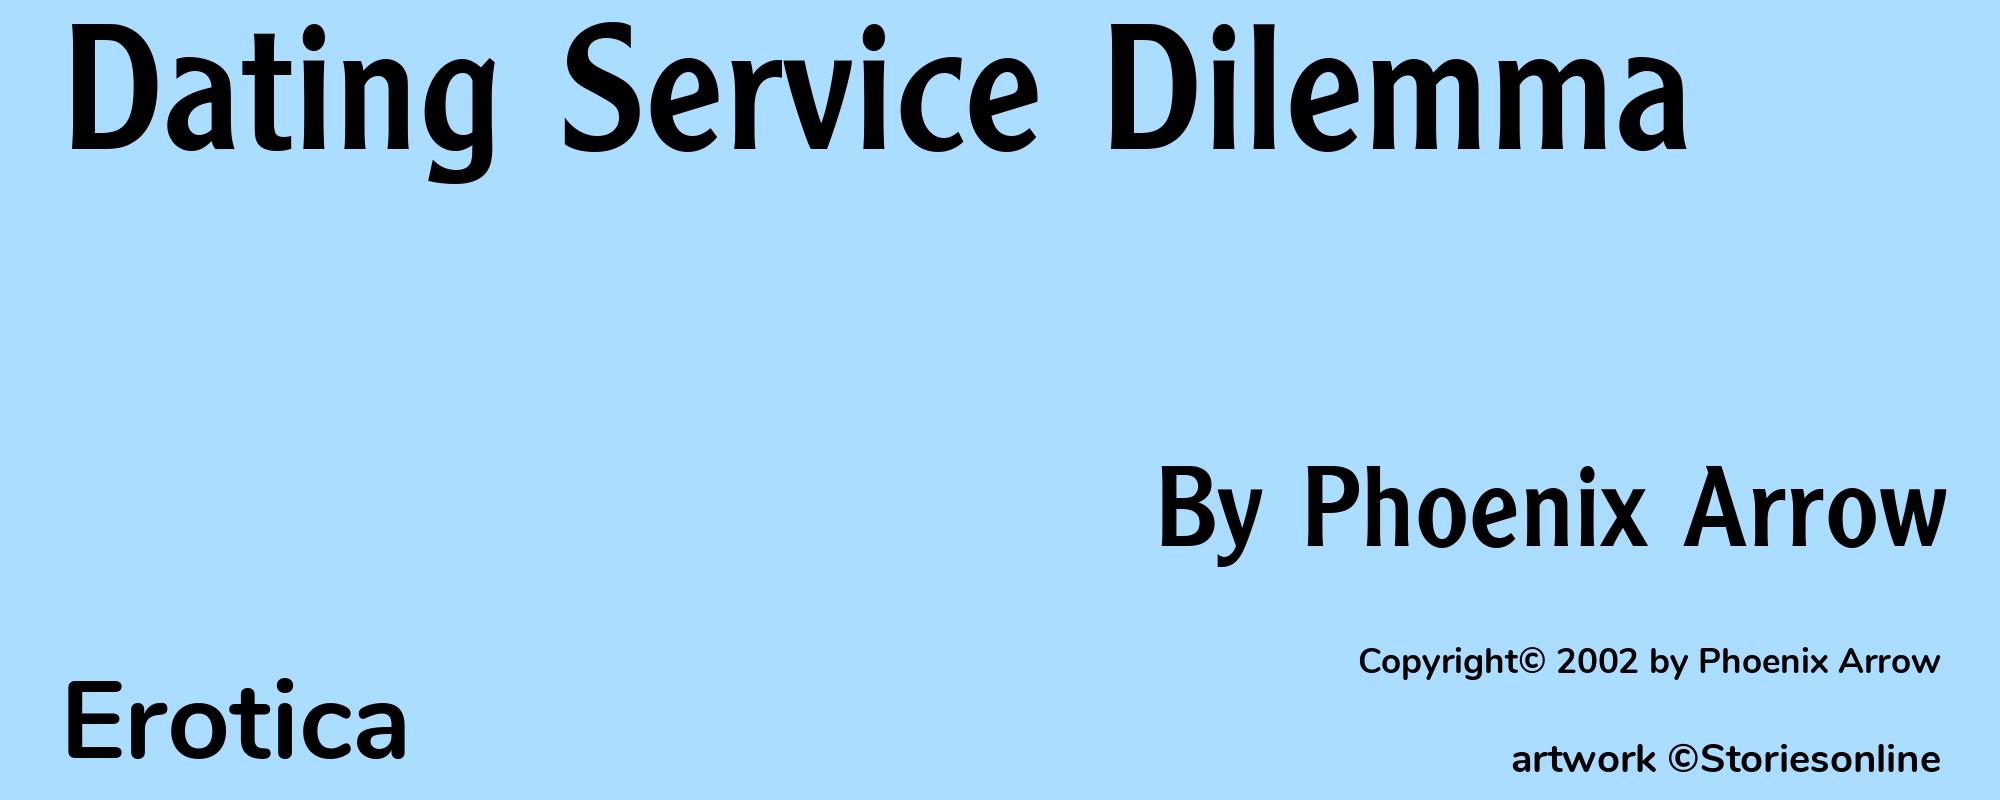 Dating Service Dilemma - Cover